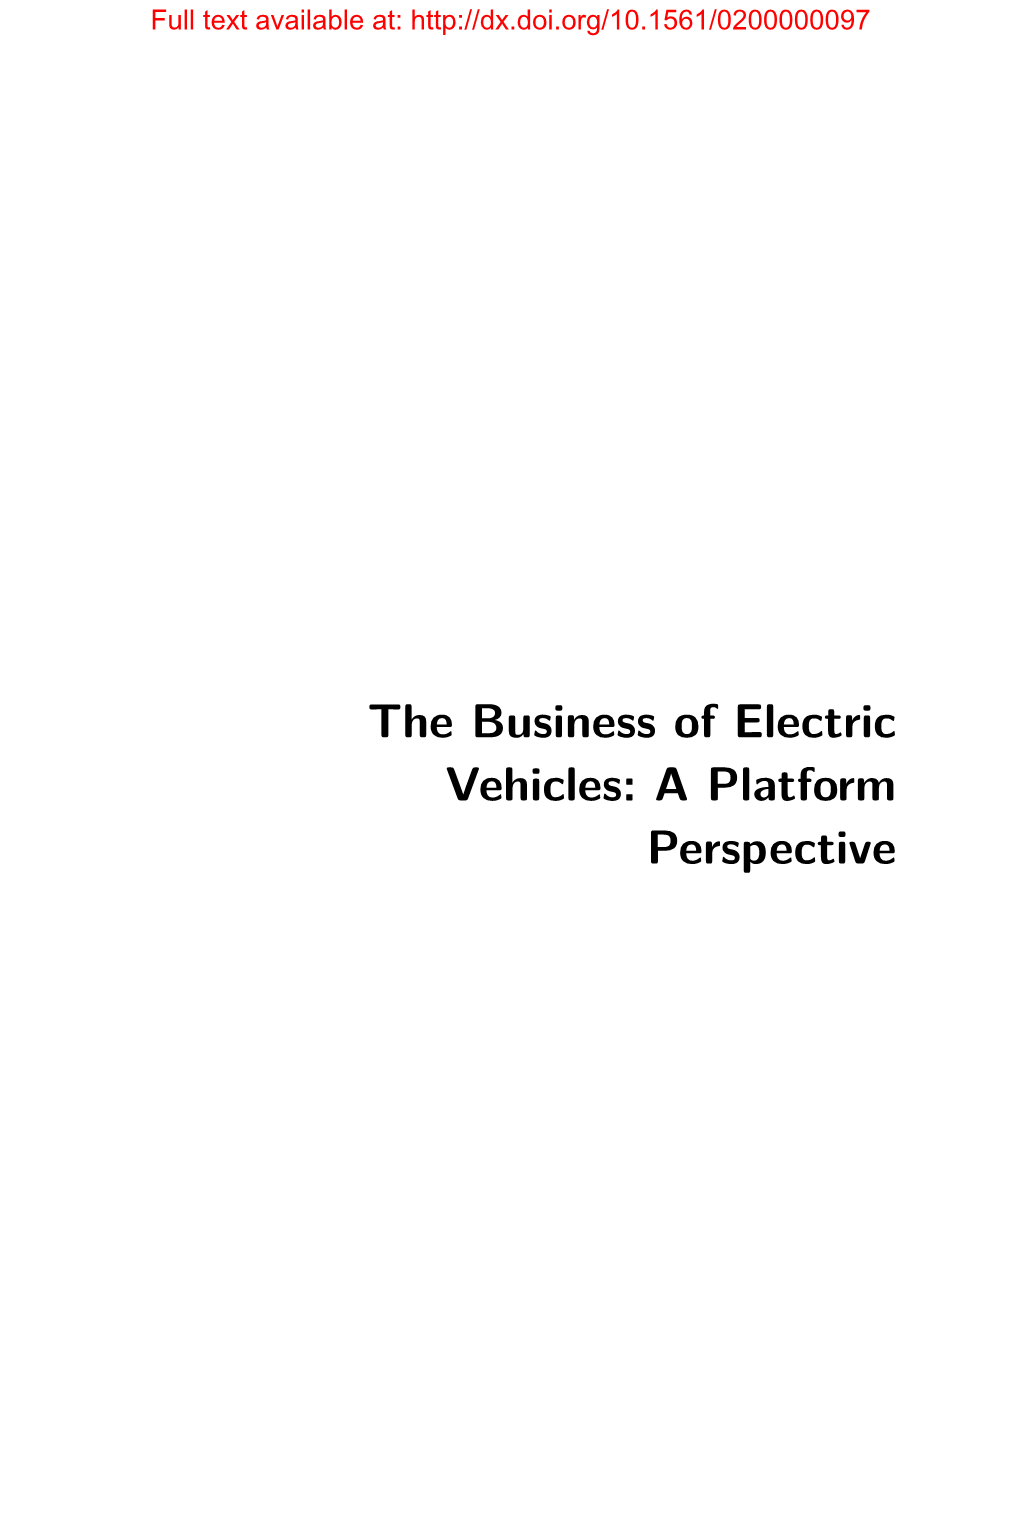 The Business of Electric Vehicles: a Platform Perspective Full Text Available At